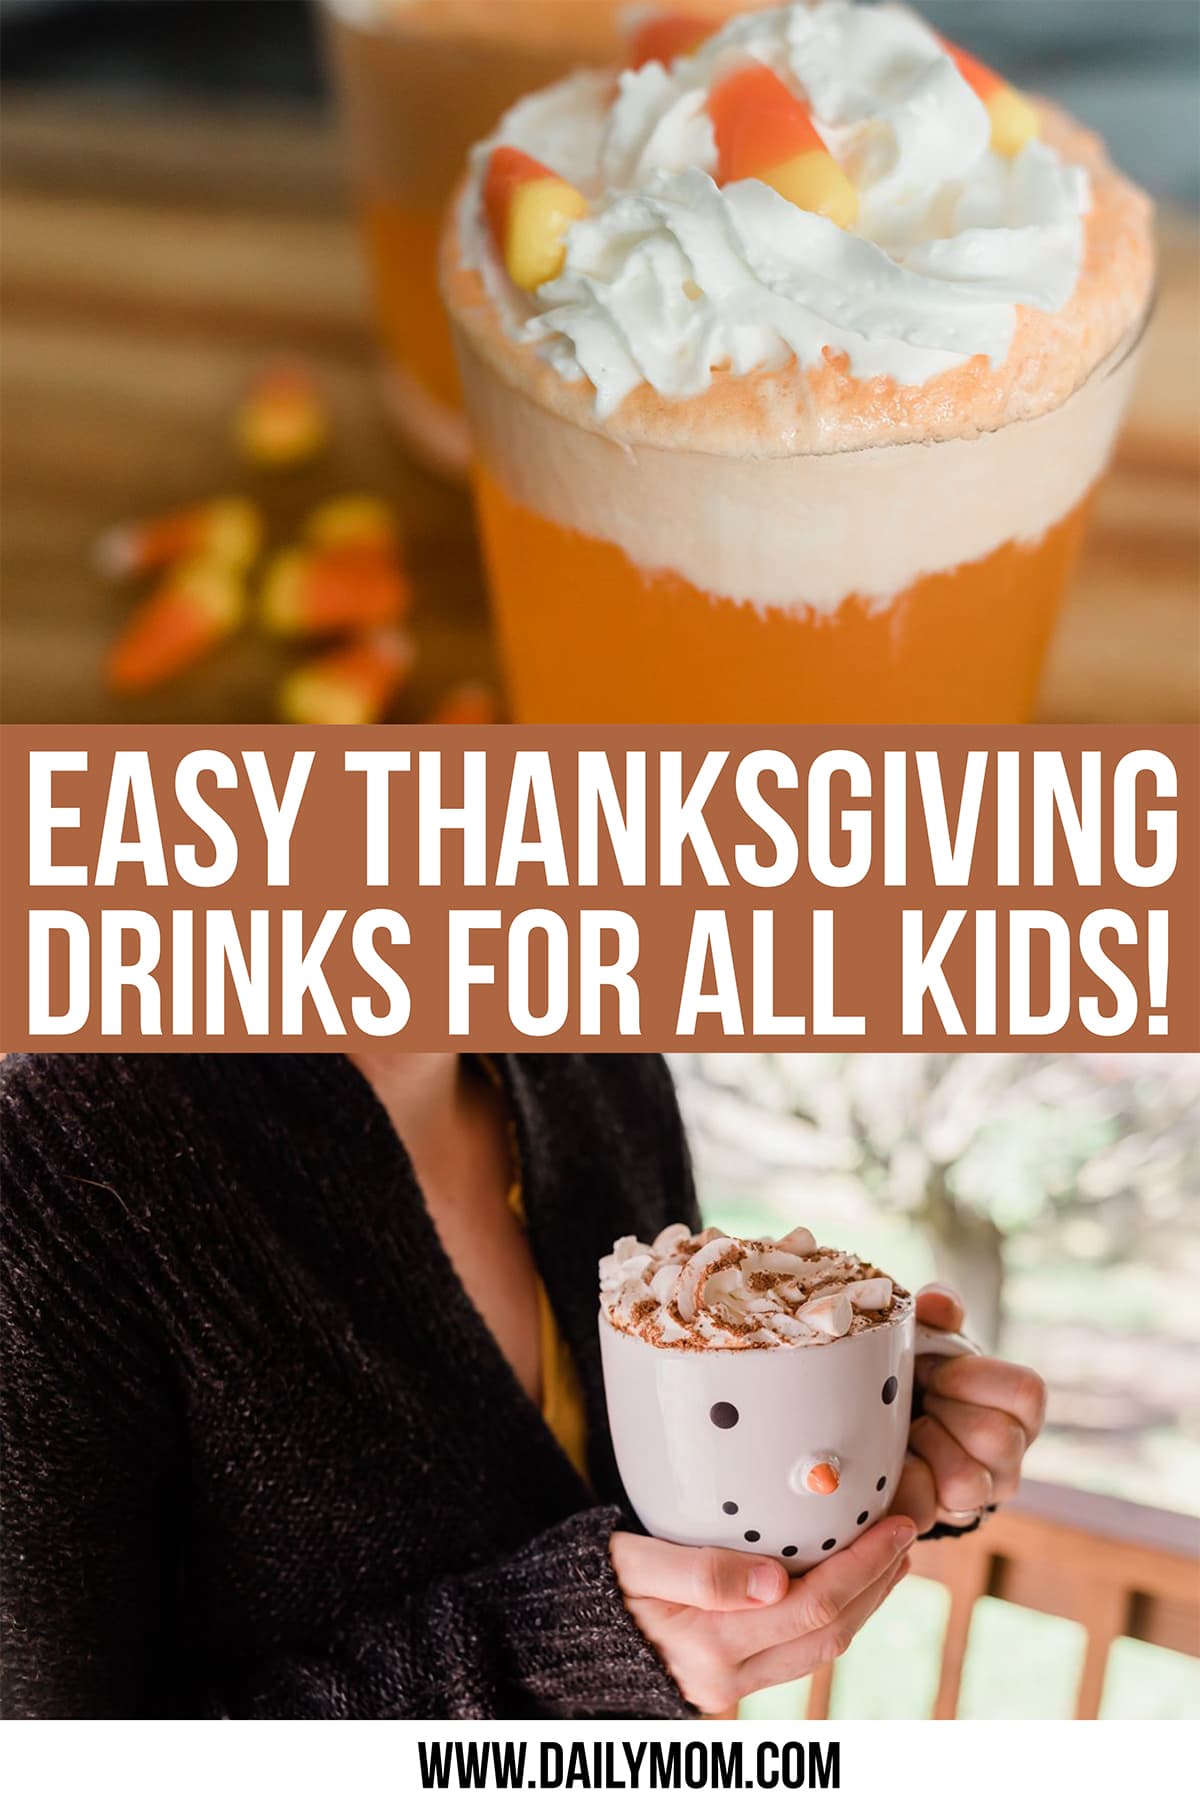 12 Easy And Delicious Thanksgiving Drinks For Kids (And Adults)